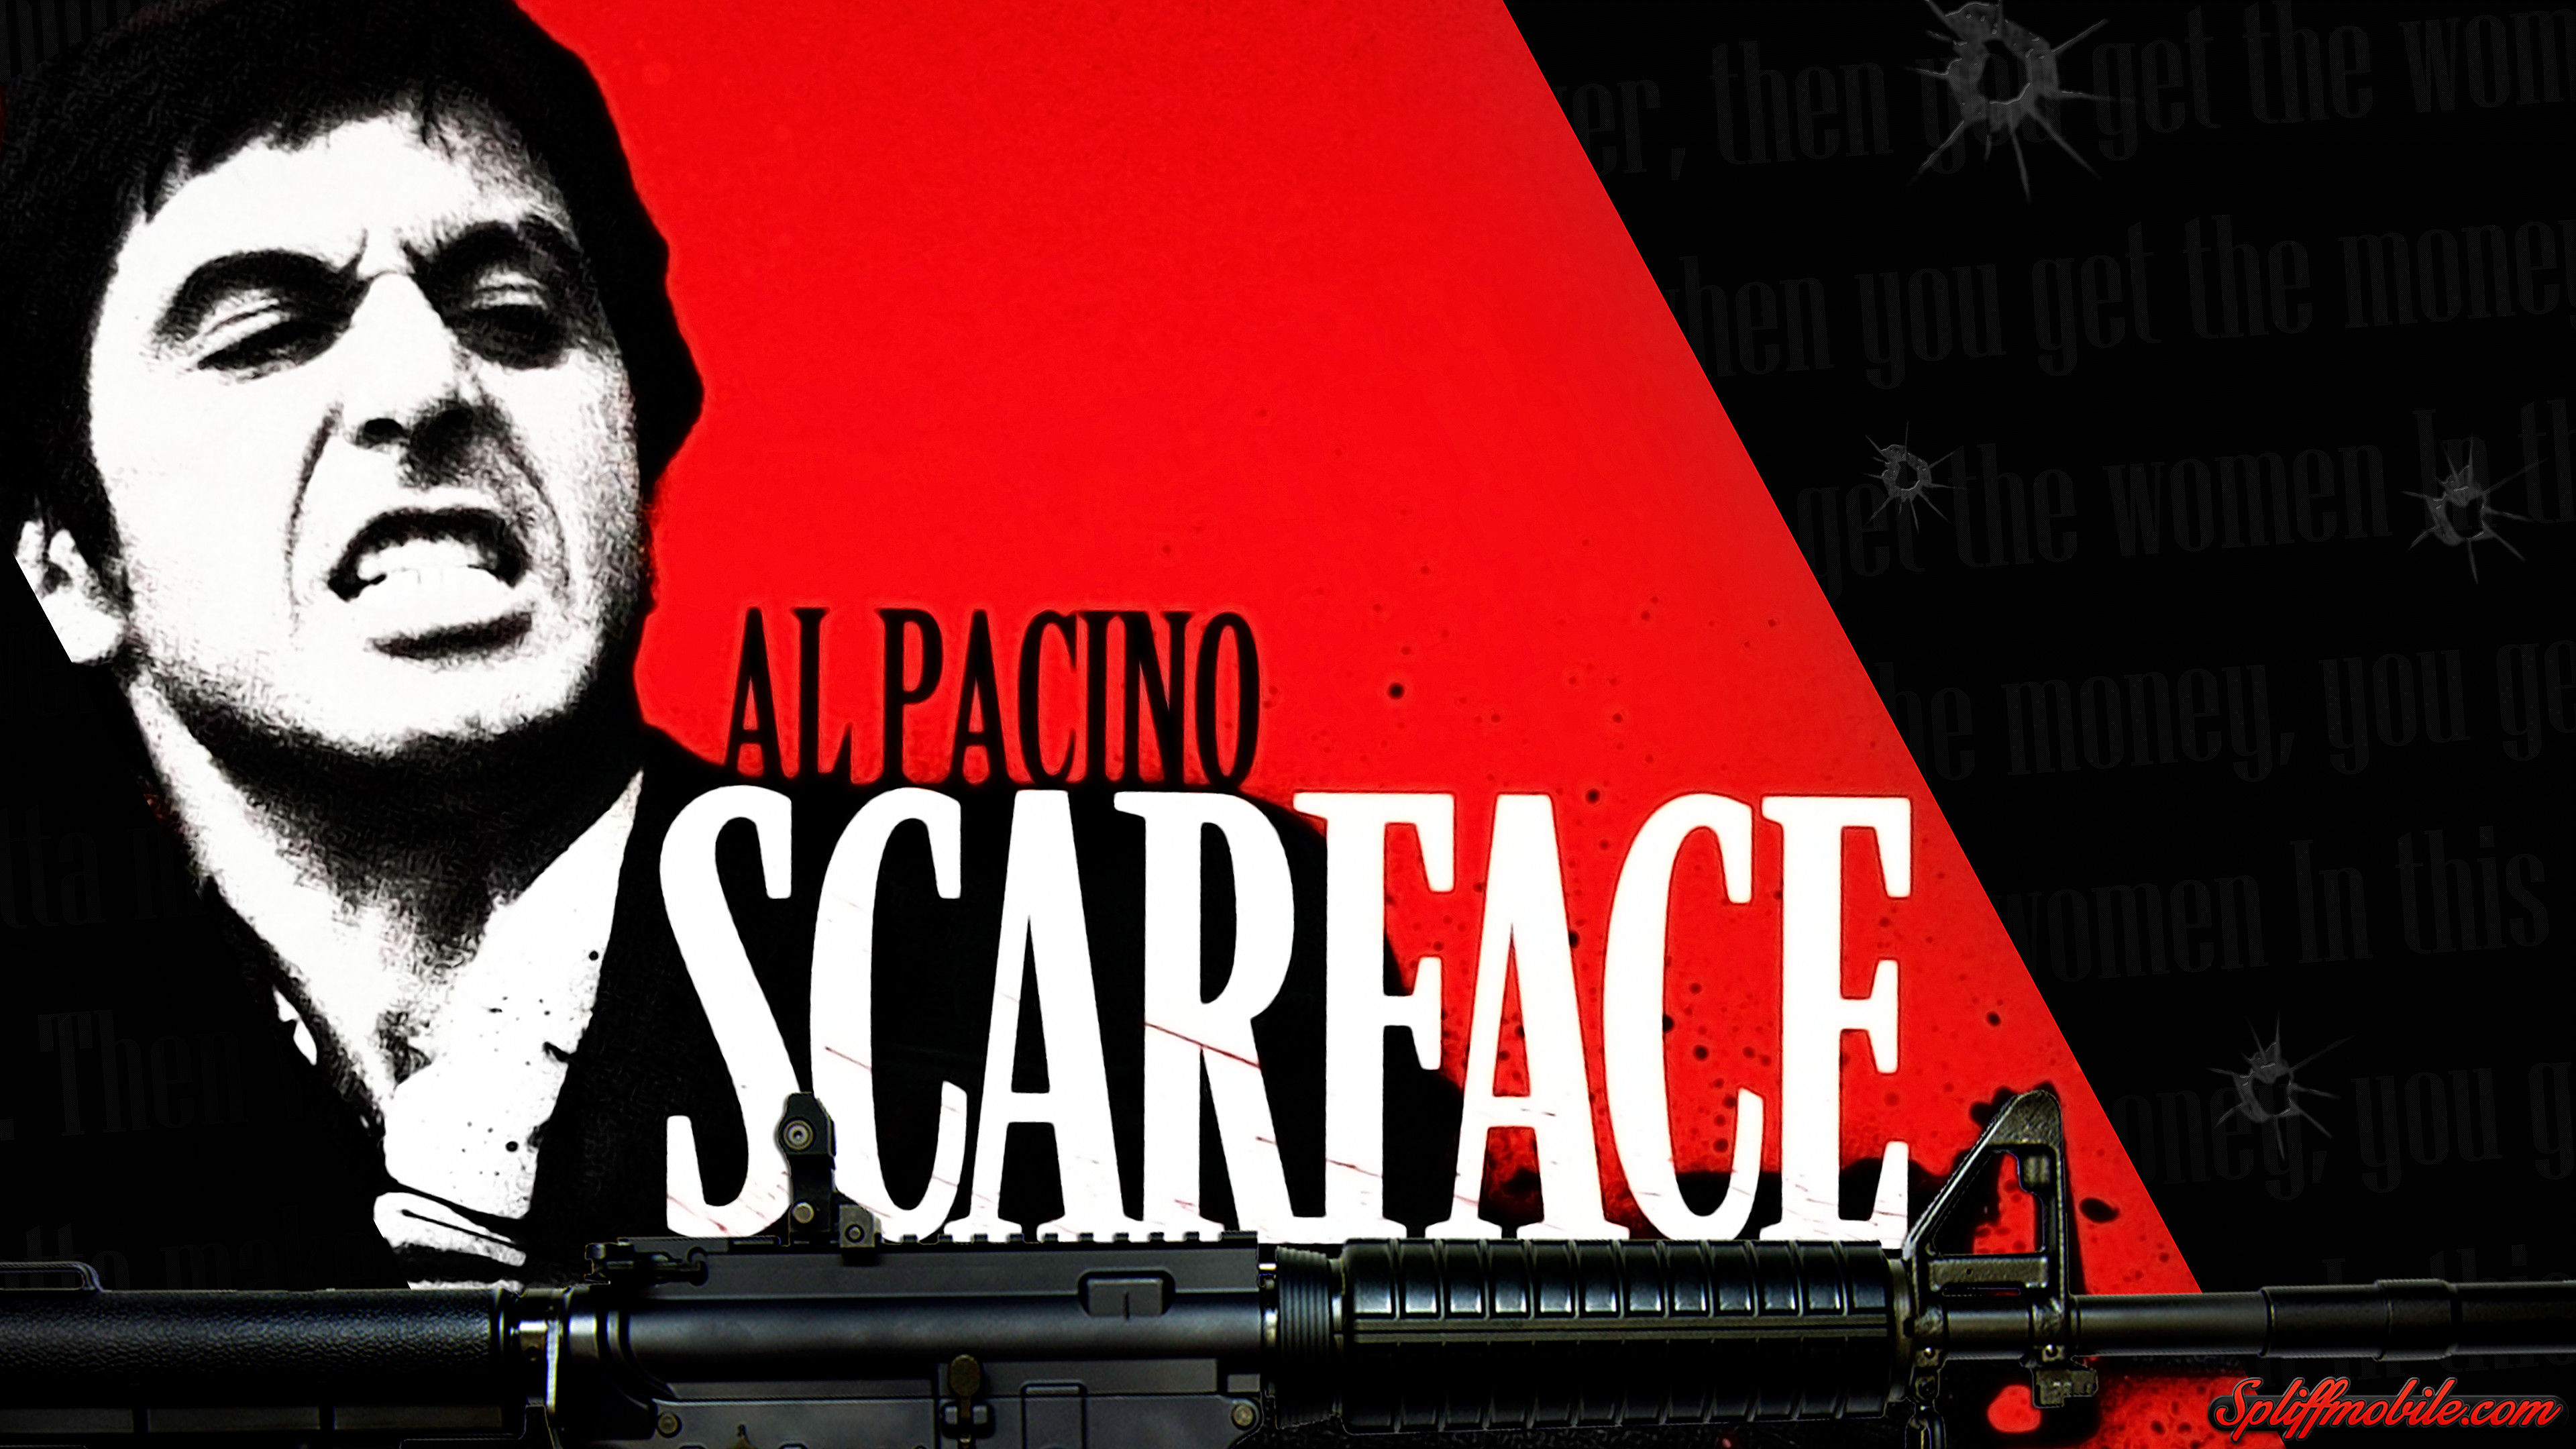 scarface wallpaper,movie,font,poster,action film,games